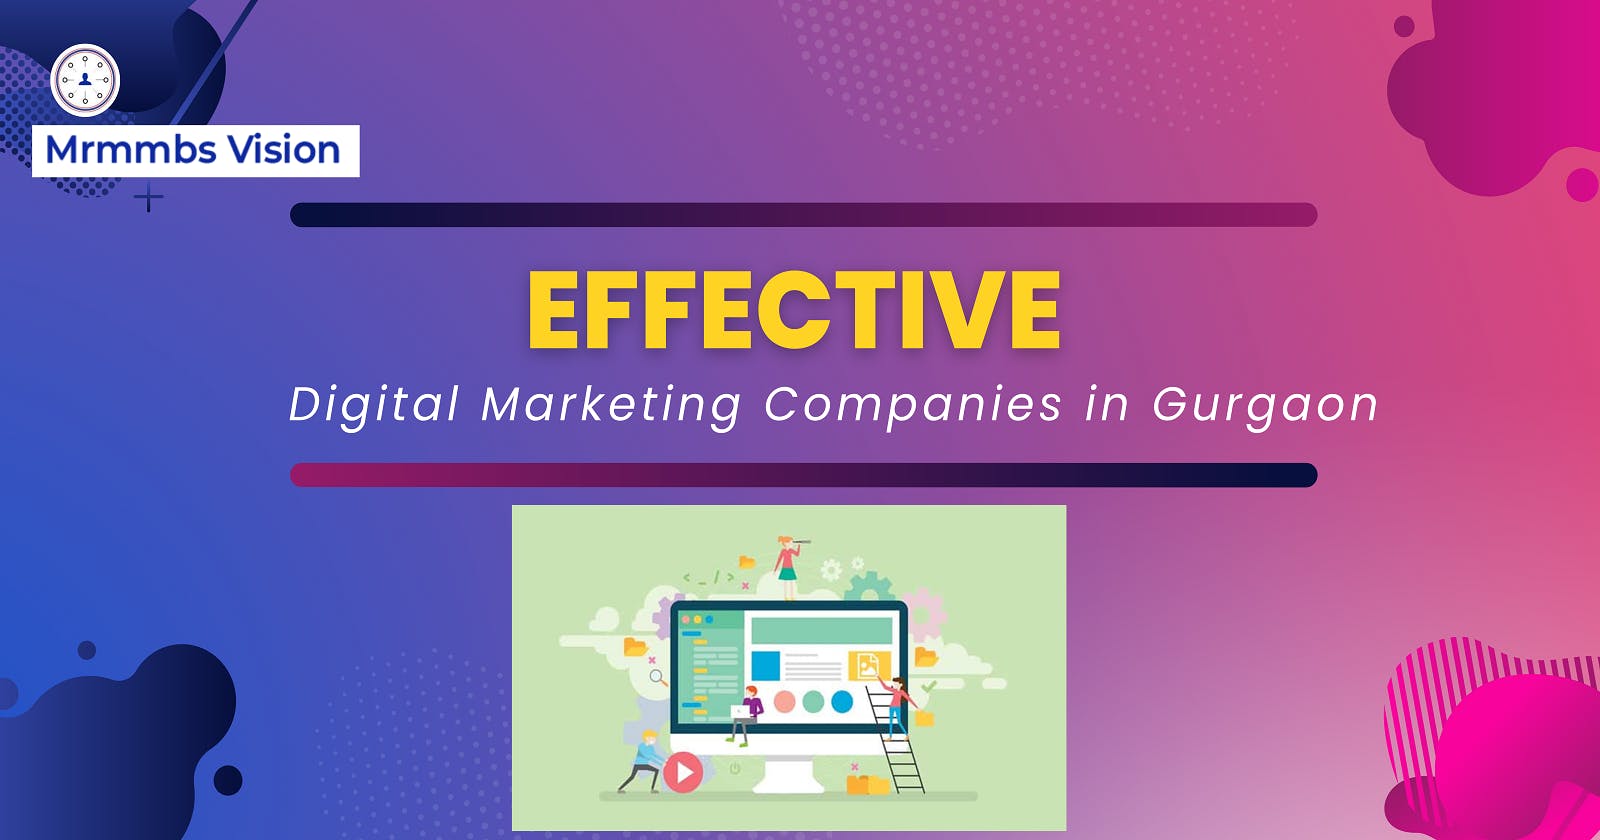 8 Fantastic and Effective Digital Marketing Companies in Gurgaon - Discover the Unbelievable Number 3!